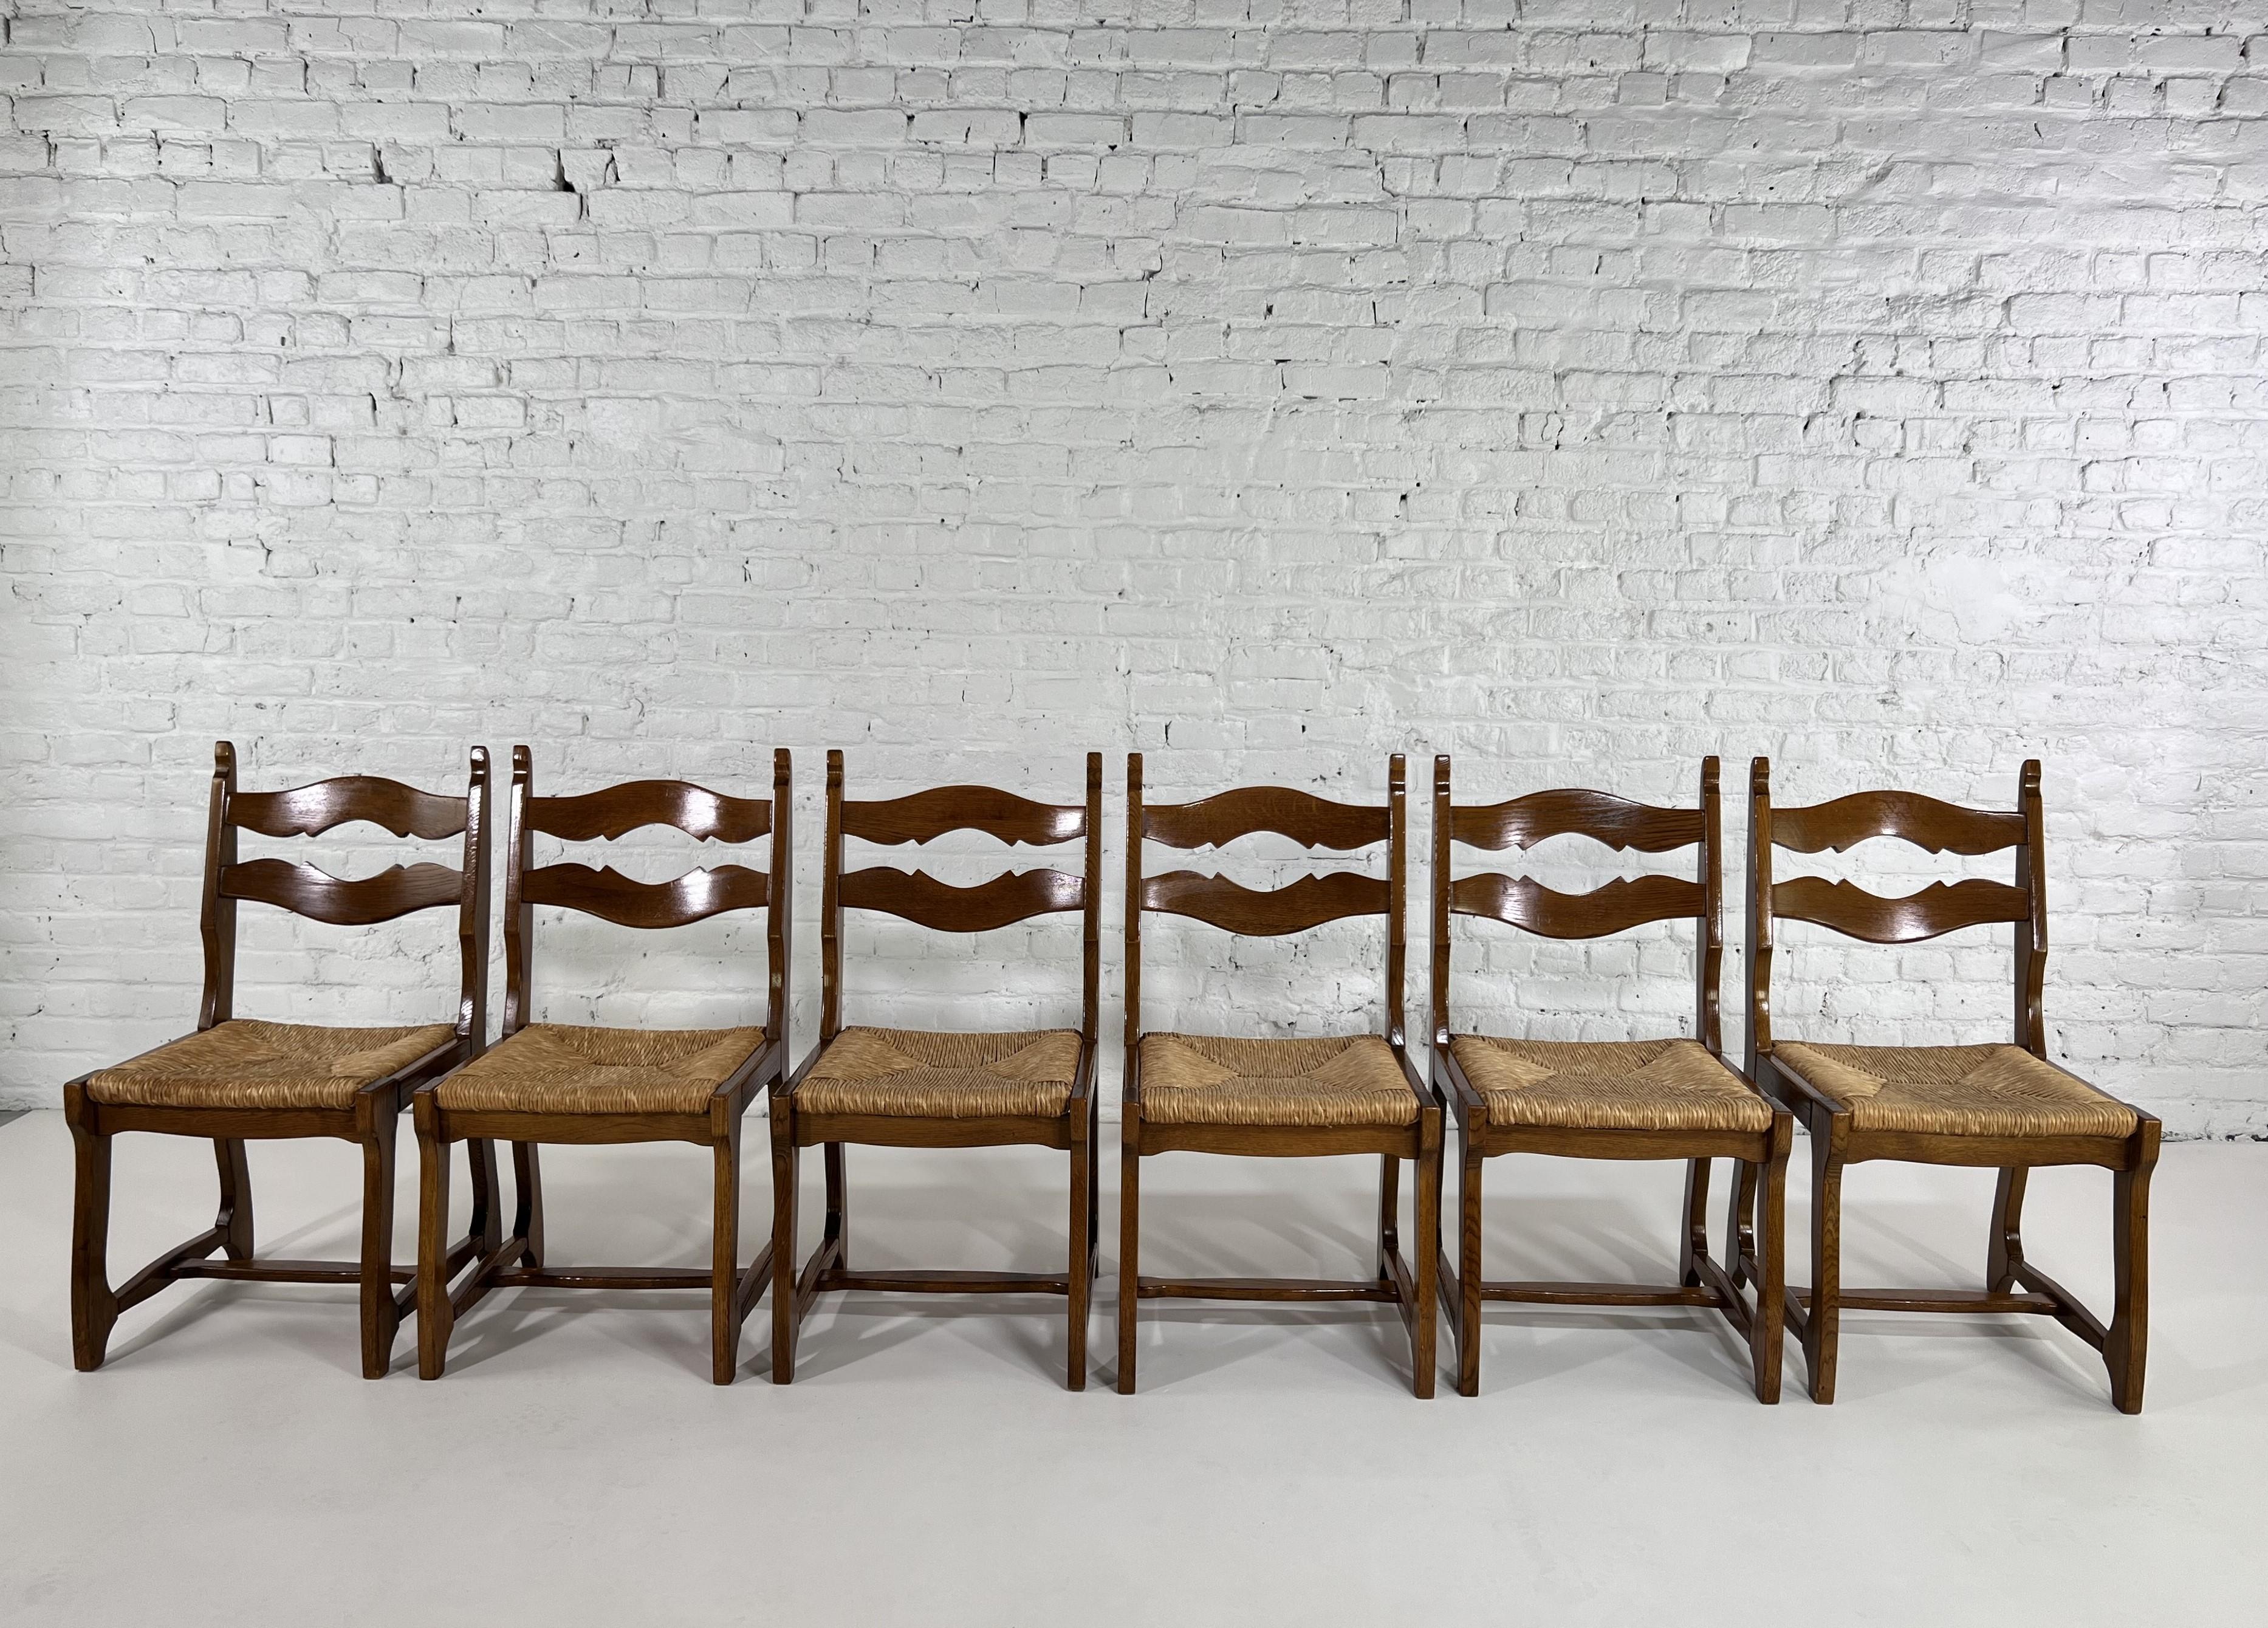 1950s Design Oak Wooden And Braided Straw Seats Set of 6 Chairs composed of a brutalist wooden structure adorned with a braided straw seat.